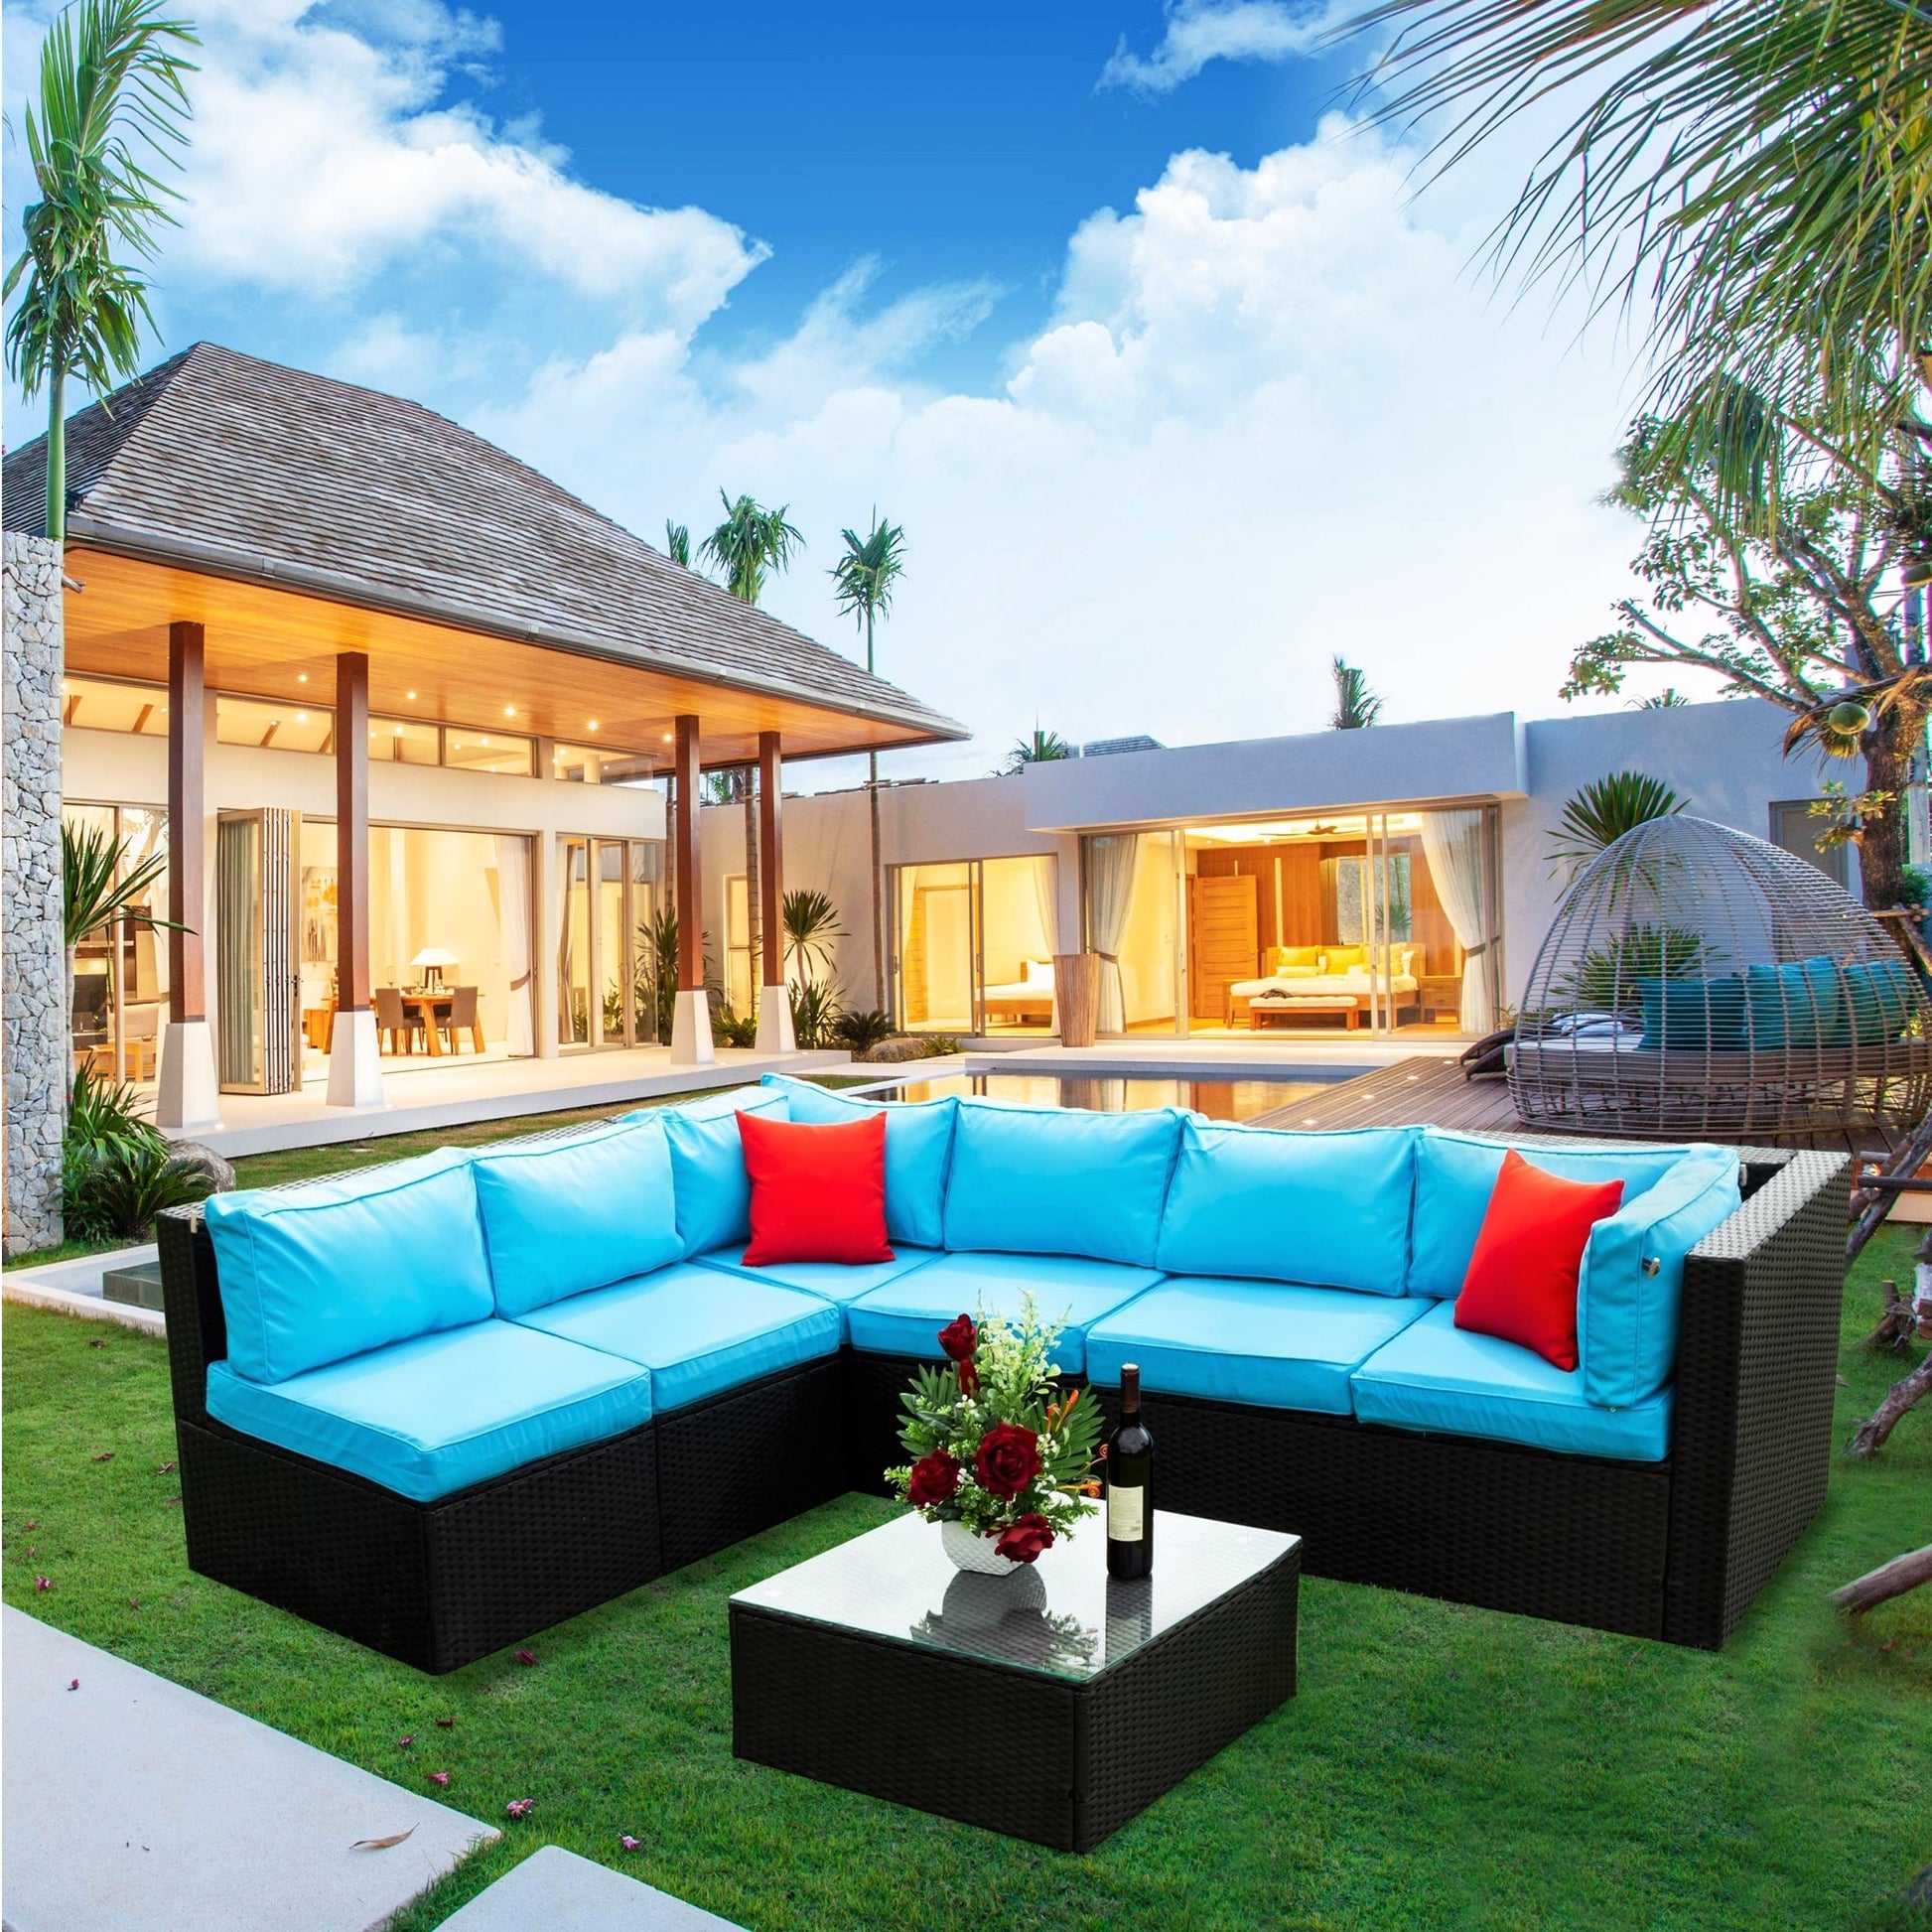 Sectional Outdoor Furniture Cushioned  U Sofa Set with 2 Pillow 5pc - Demine Essentials